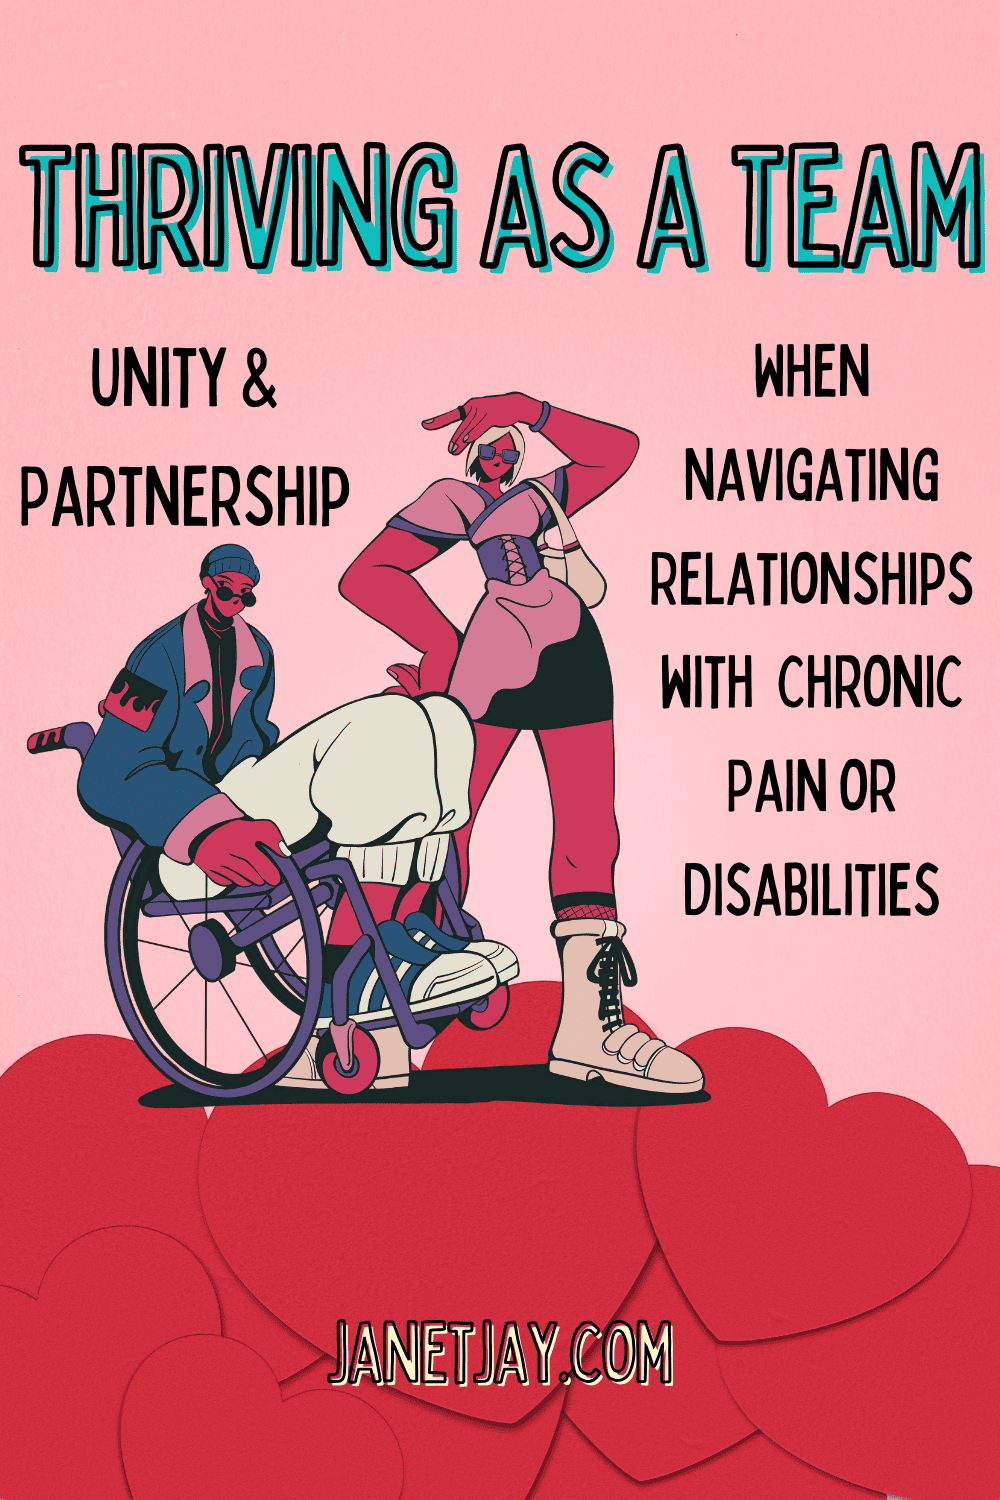 on a floor of hearts, a graphic of a cool man wearing sunglasses and a beanie in a wheelchair with his badass giflrriend, wearing headphones and boots, next to him giving a peace sign. Text reads "Thriving as a Team Unity and Partnership When Navigating Chronic Pain In Relationships janetjay.com